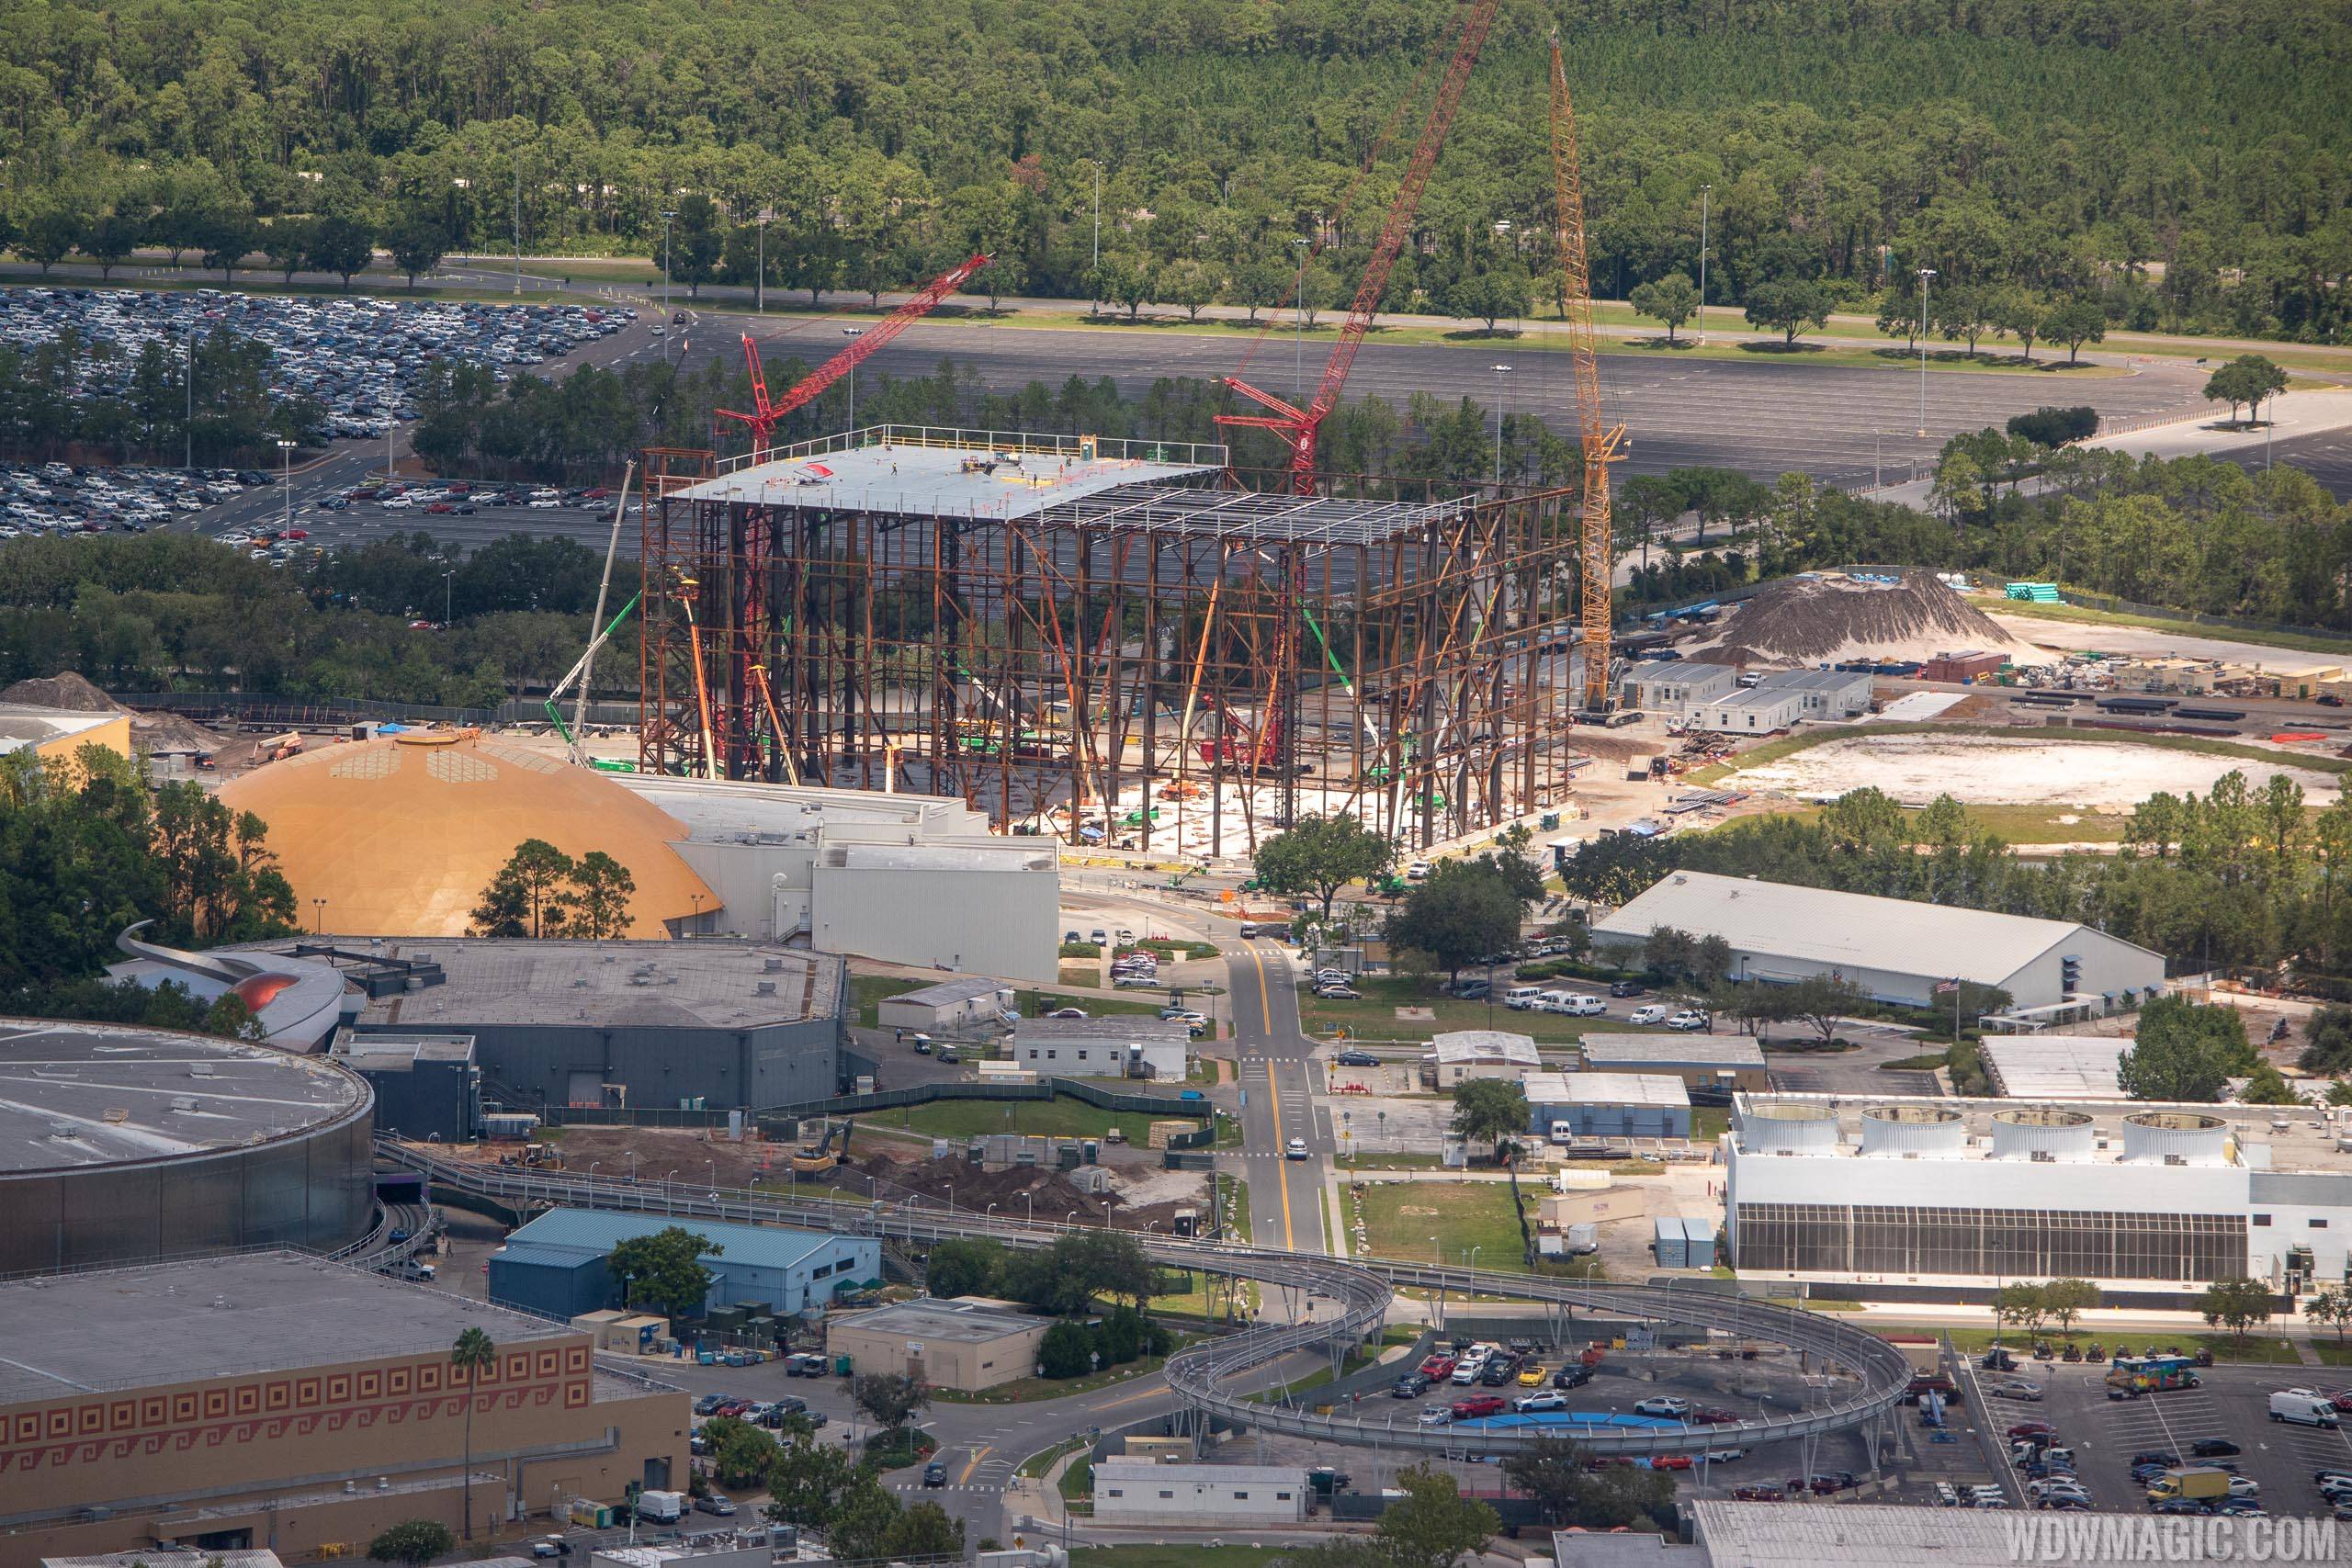 Guardians of the Galaxy construction aerial views - August 2018